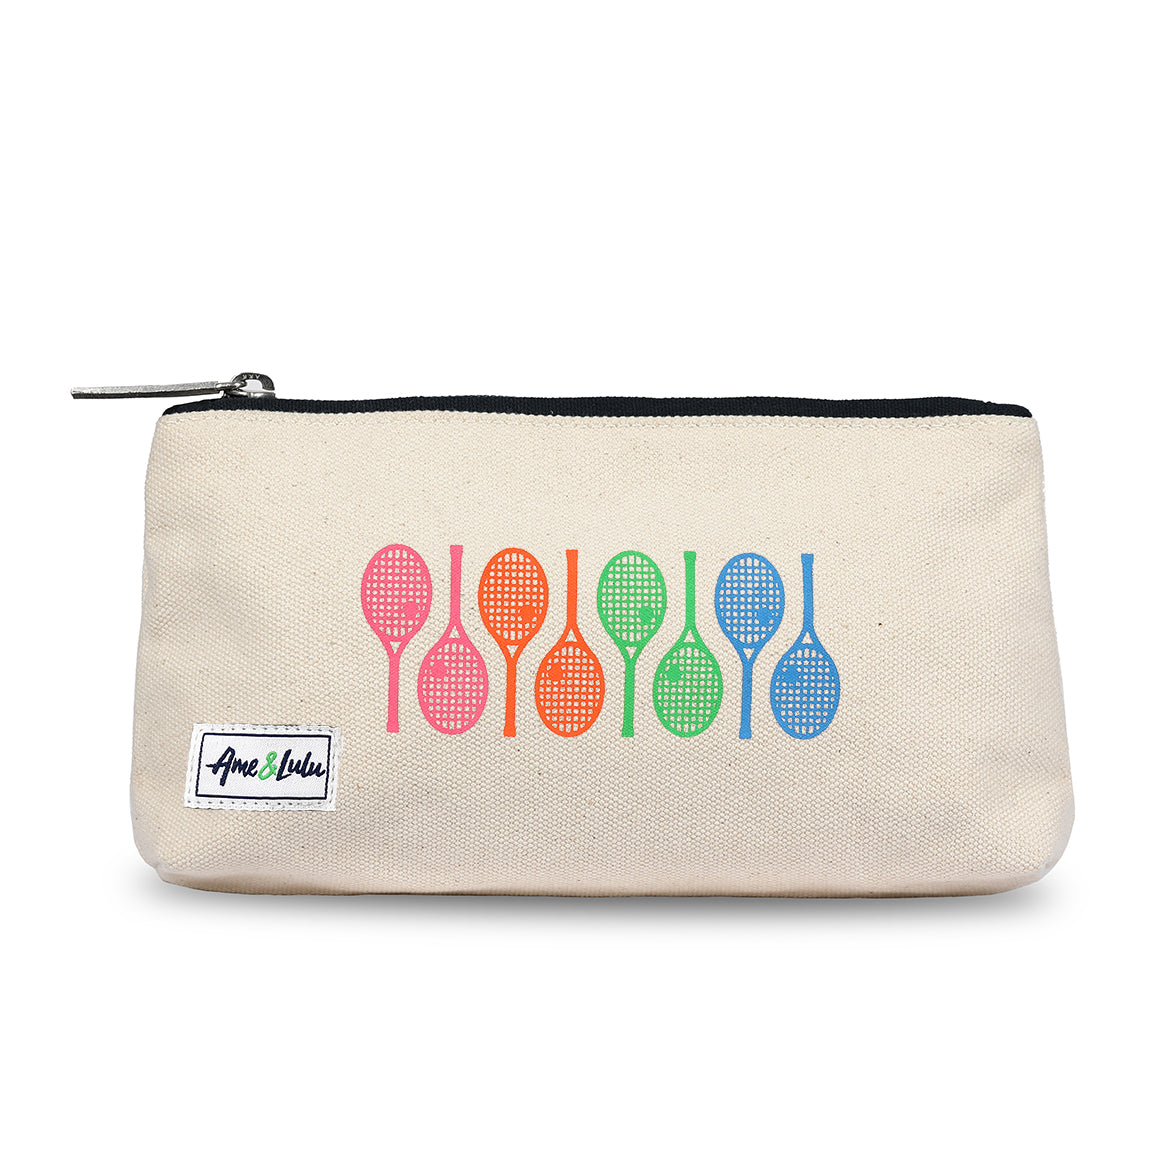 Front view of small canvas makeup pouch with navy zipper. Front has a line of rainbow racquets printed on.